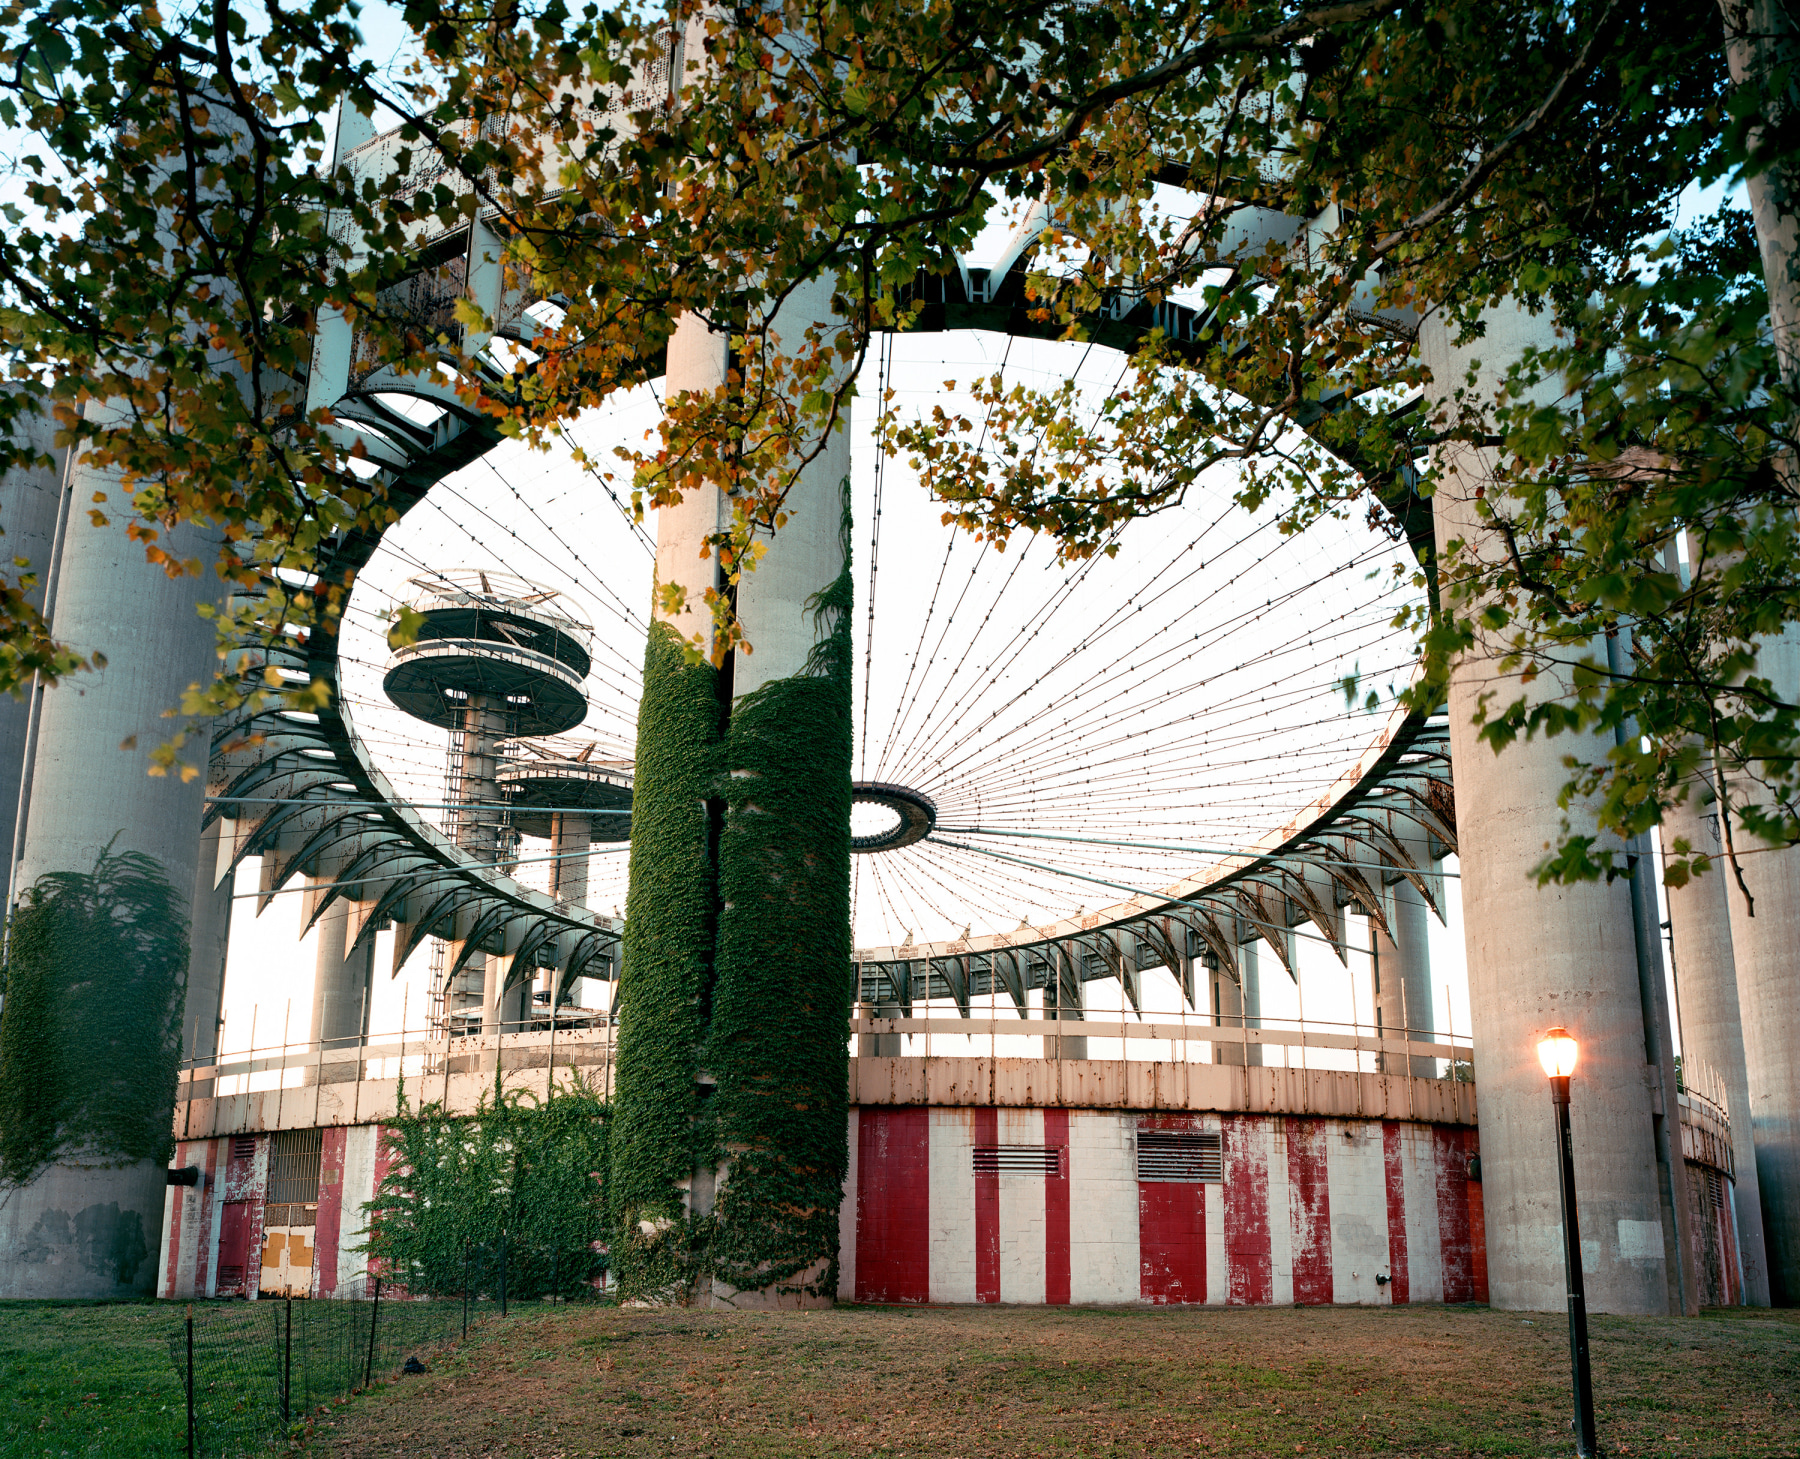 Jade Doskow photograph of the New York State Pavilion from the 1964 New York World's Fair